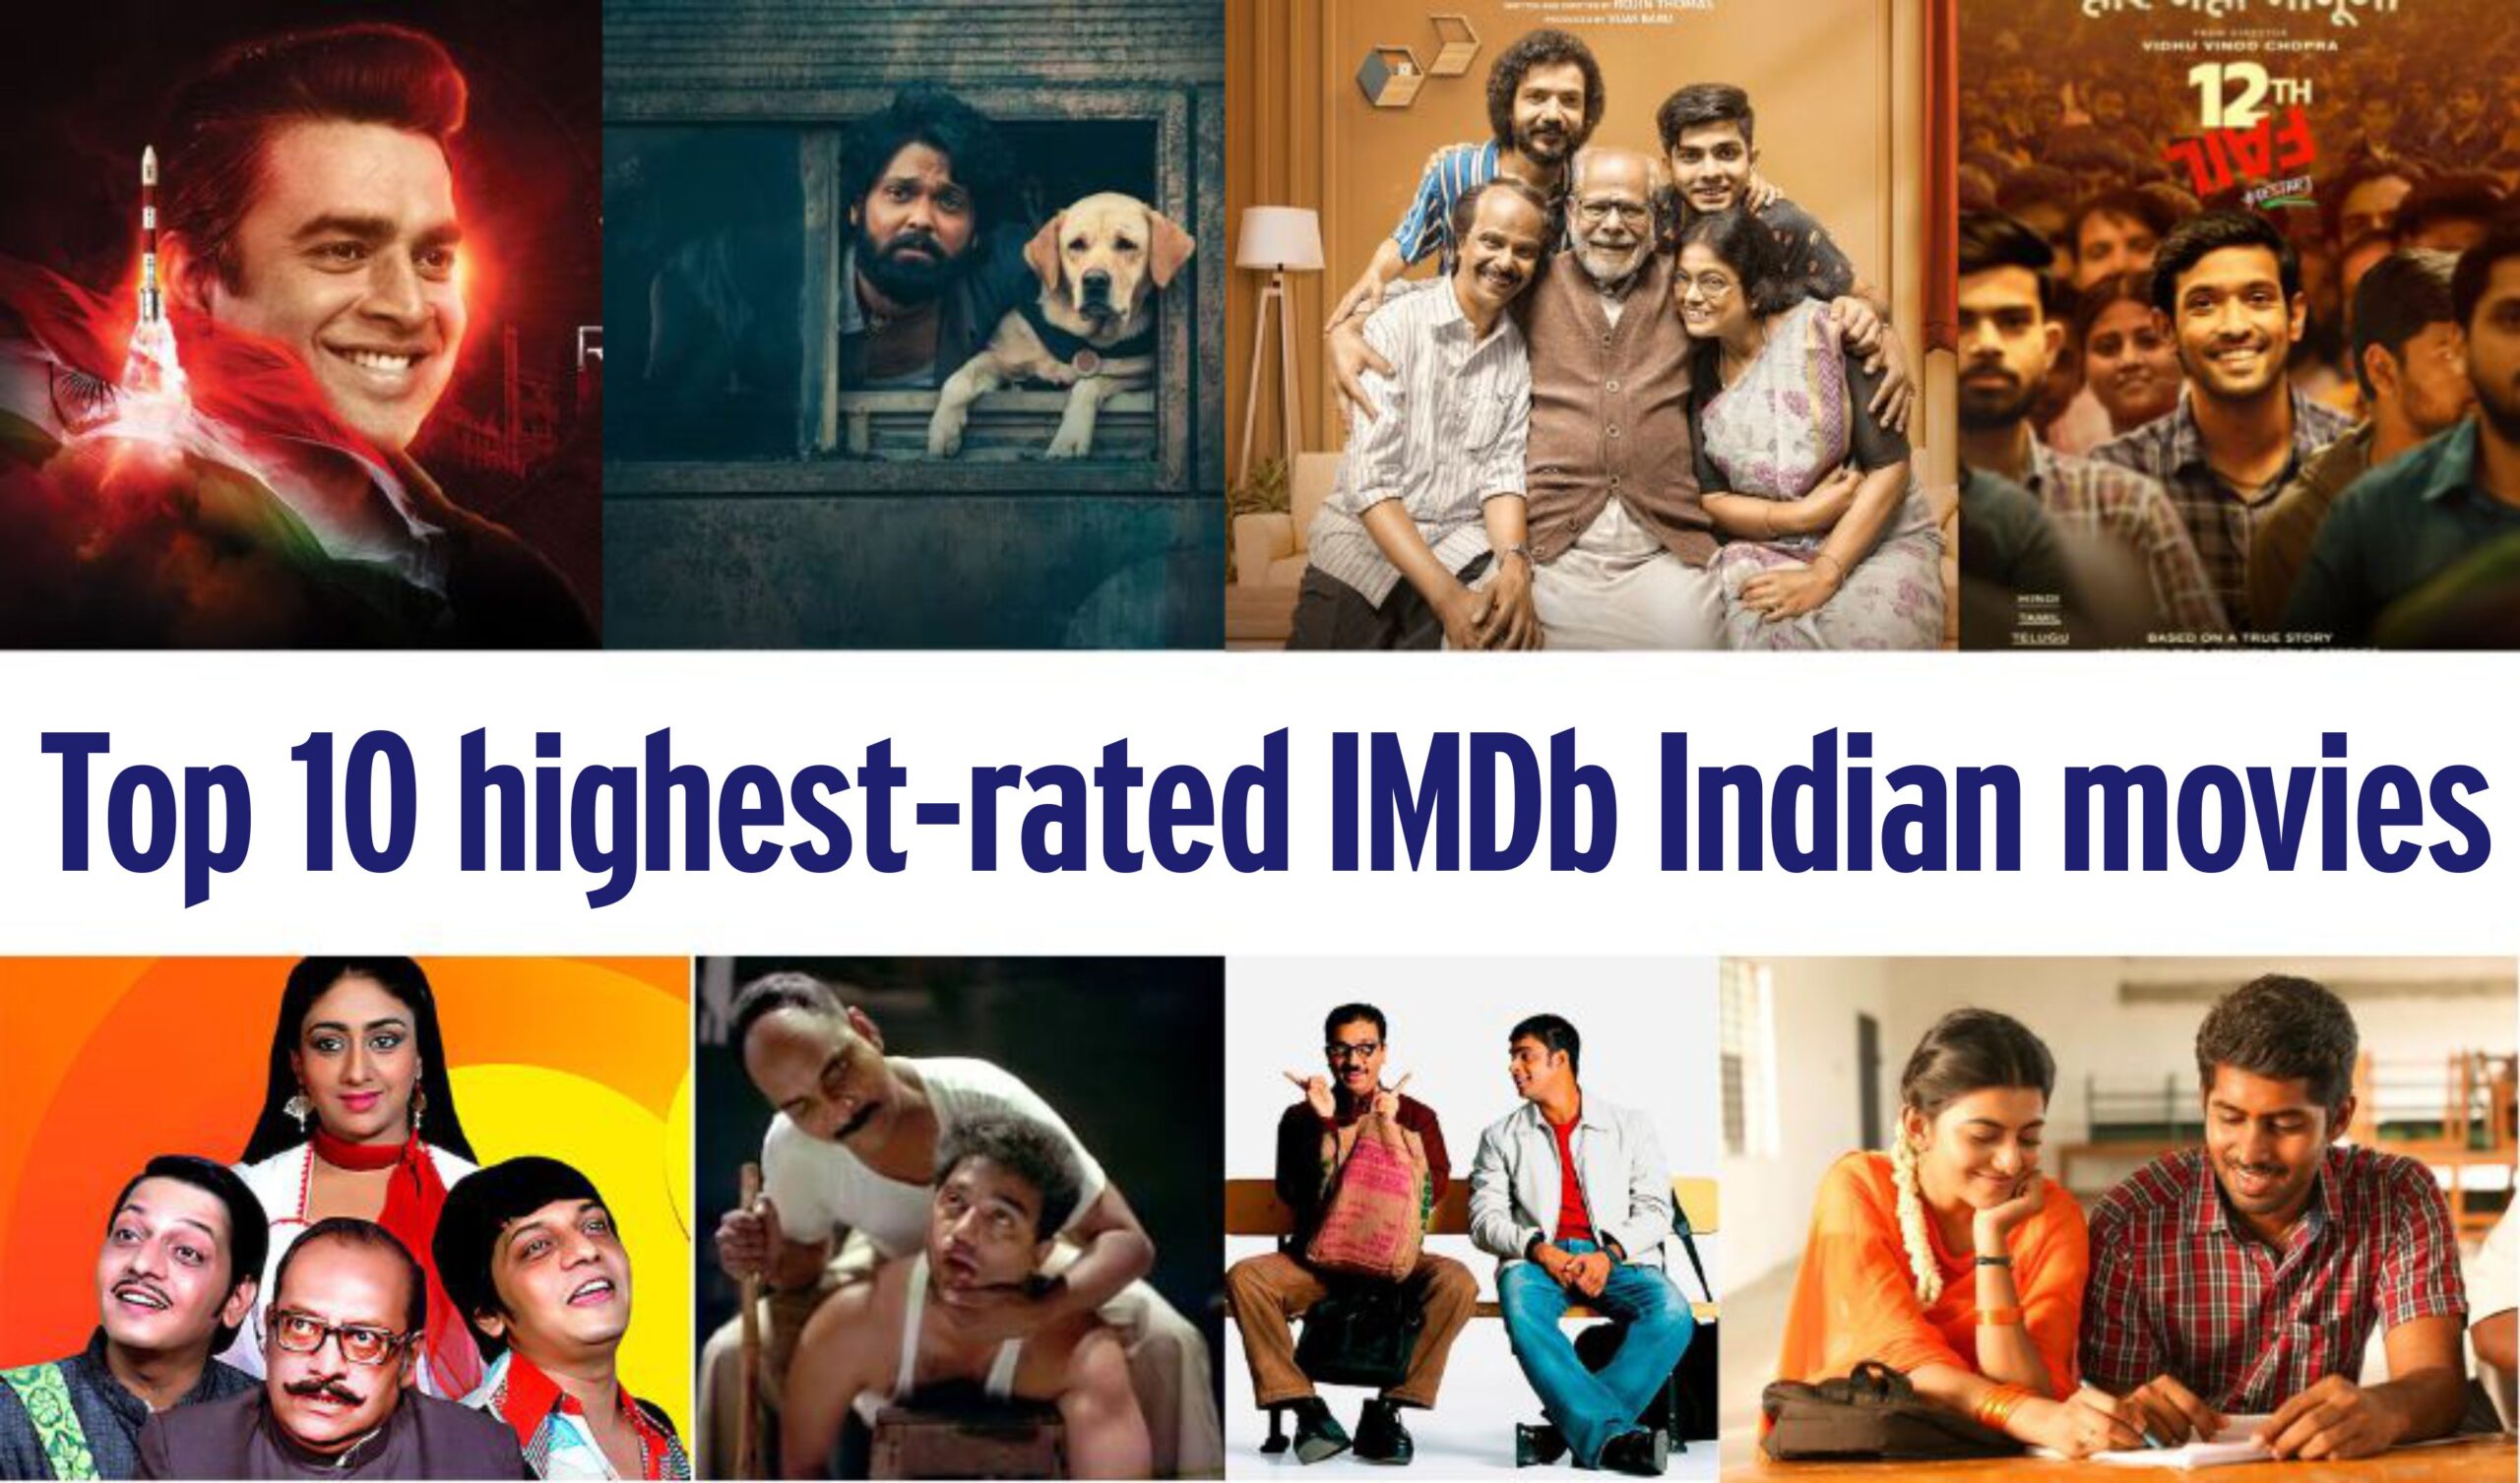 Top 10 highest-rated IMDb Indian movies